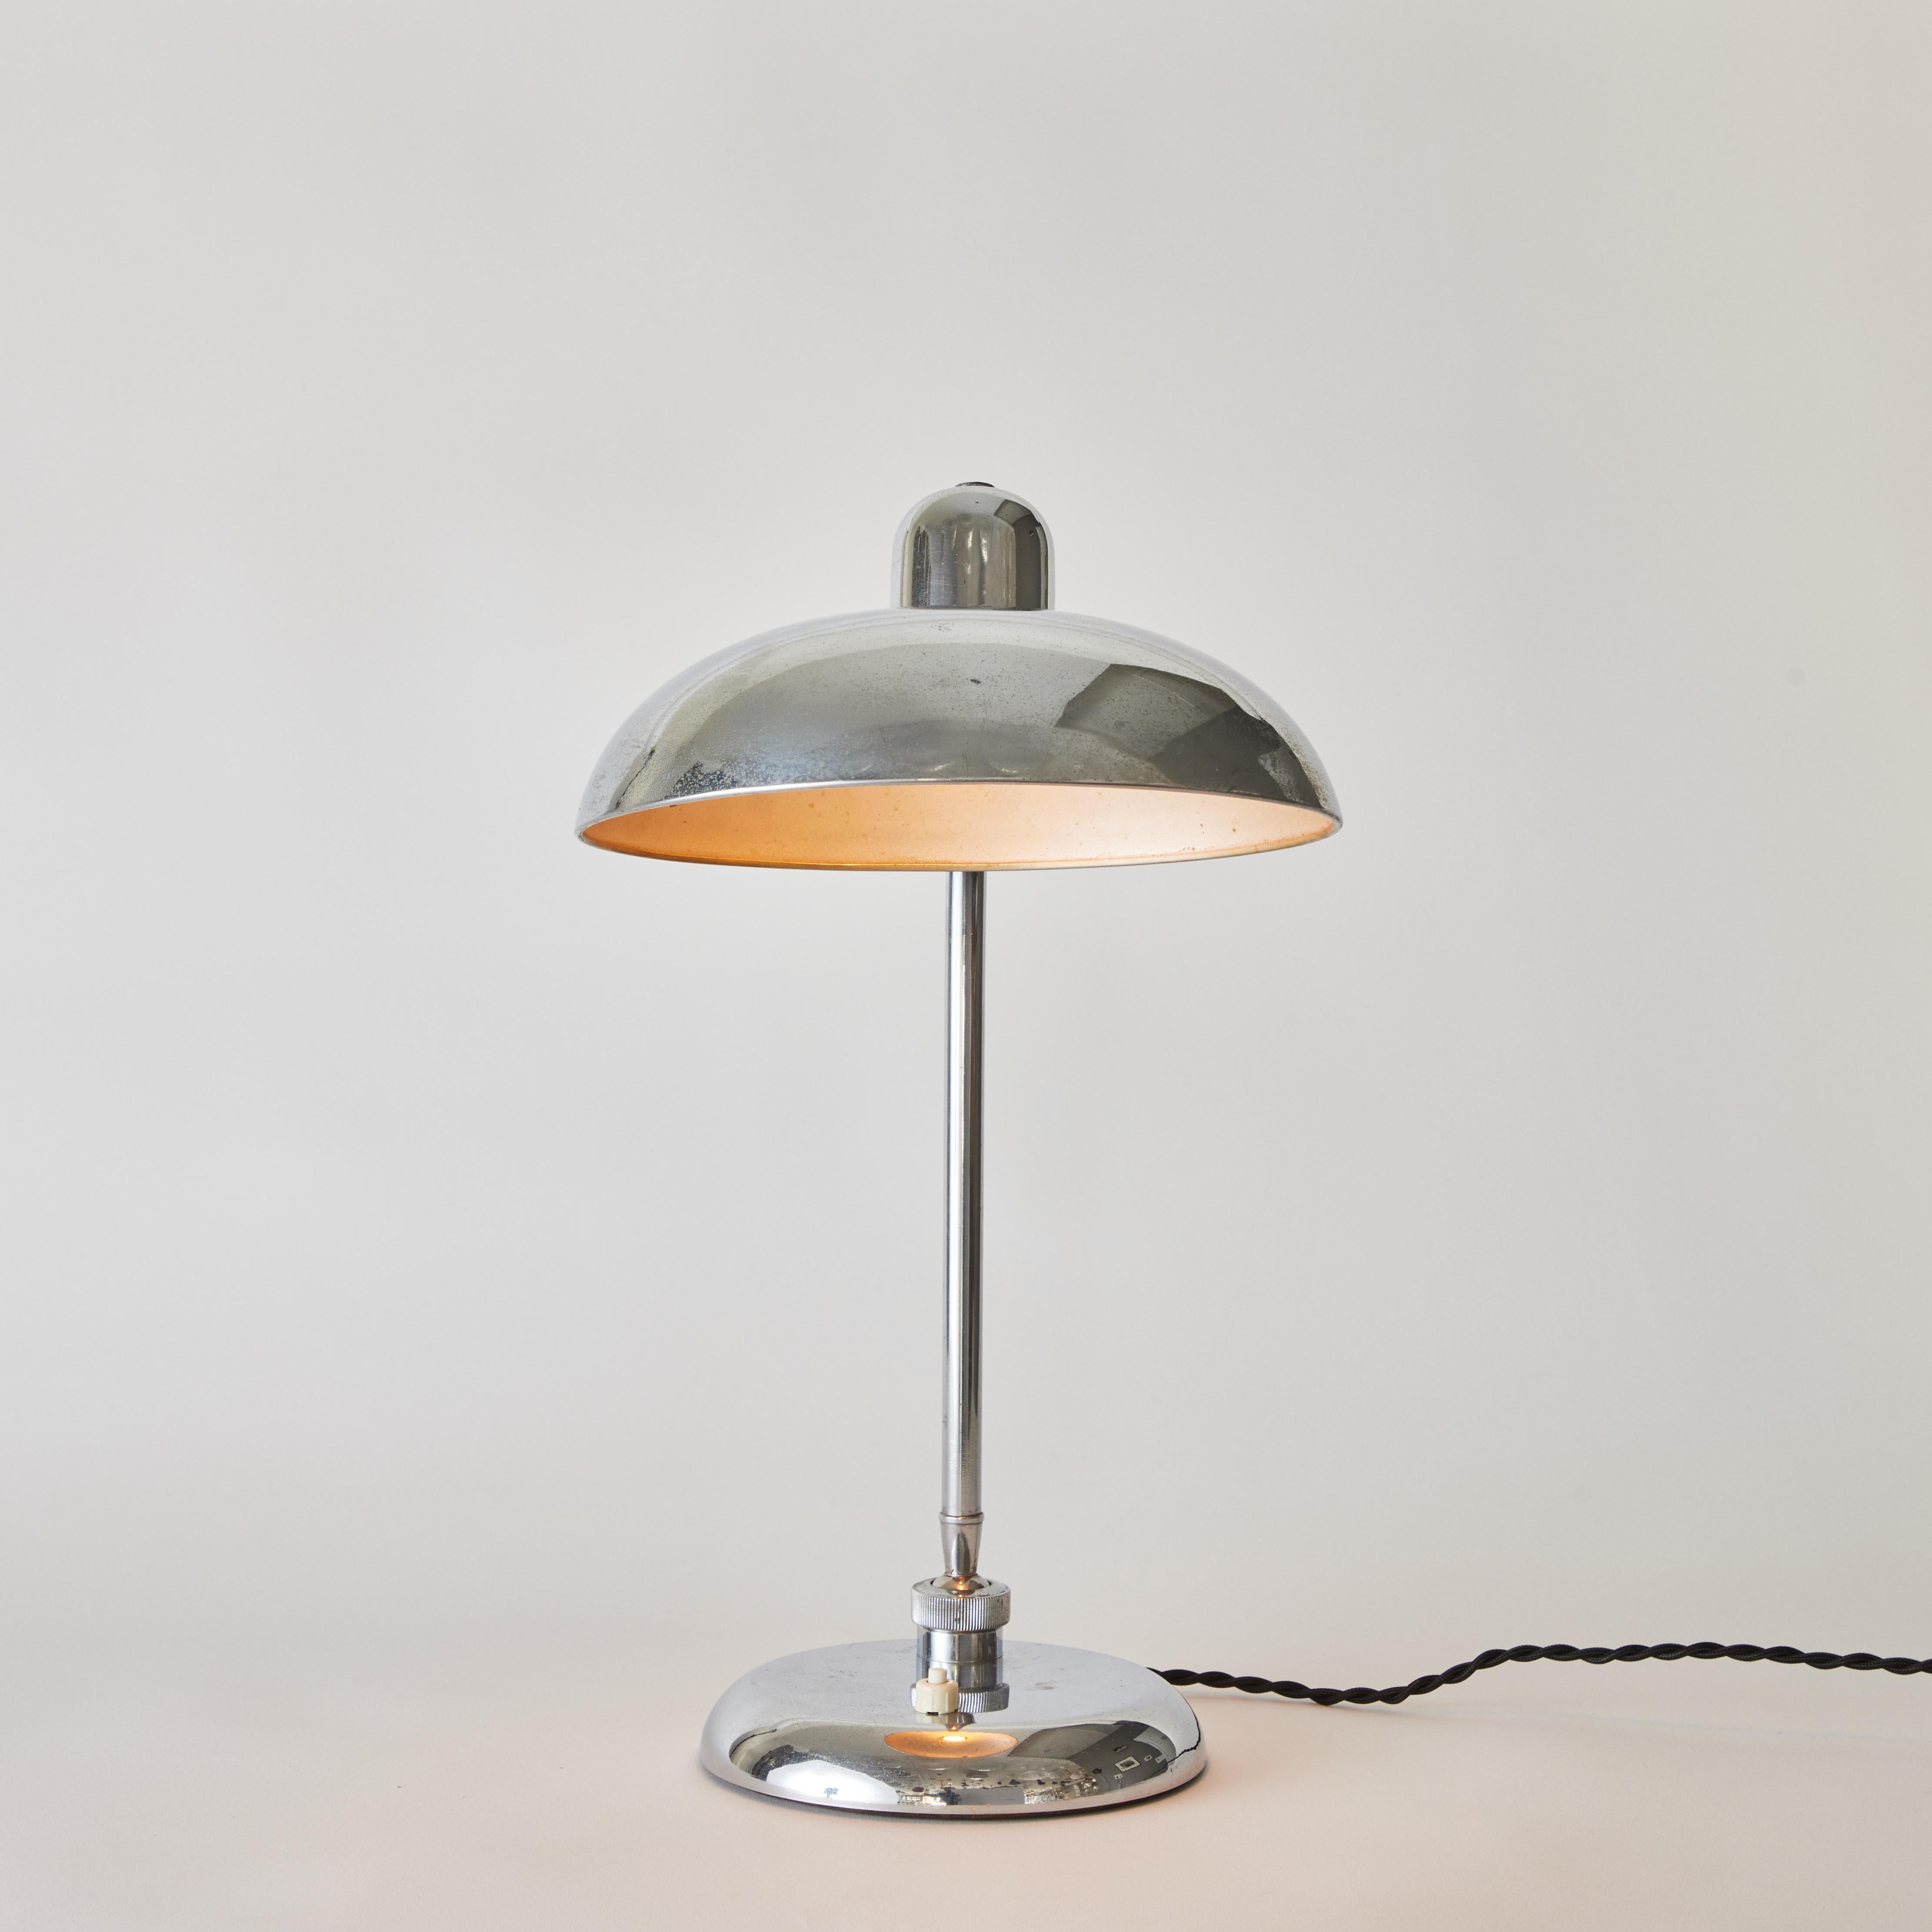 1940s Giovanni Michelucci Chrome Ministerial Table Lamp for Lariolux For Sale 11